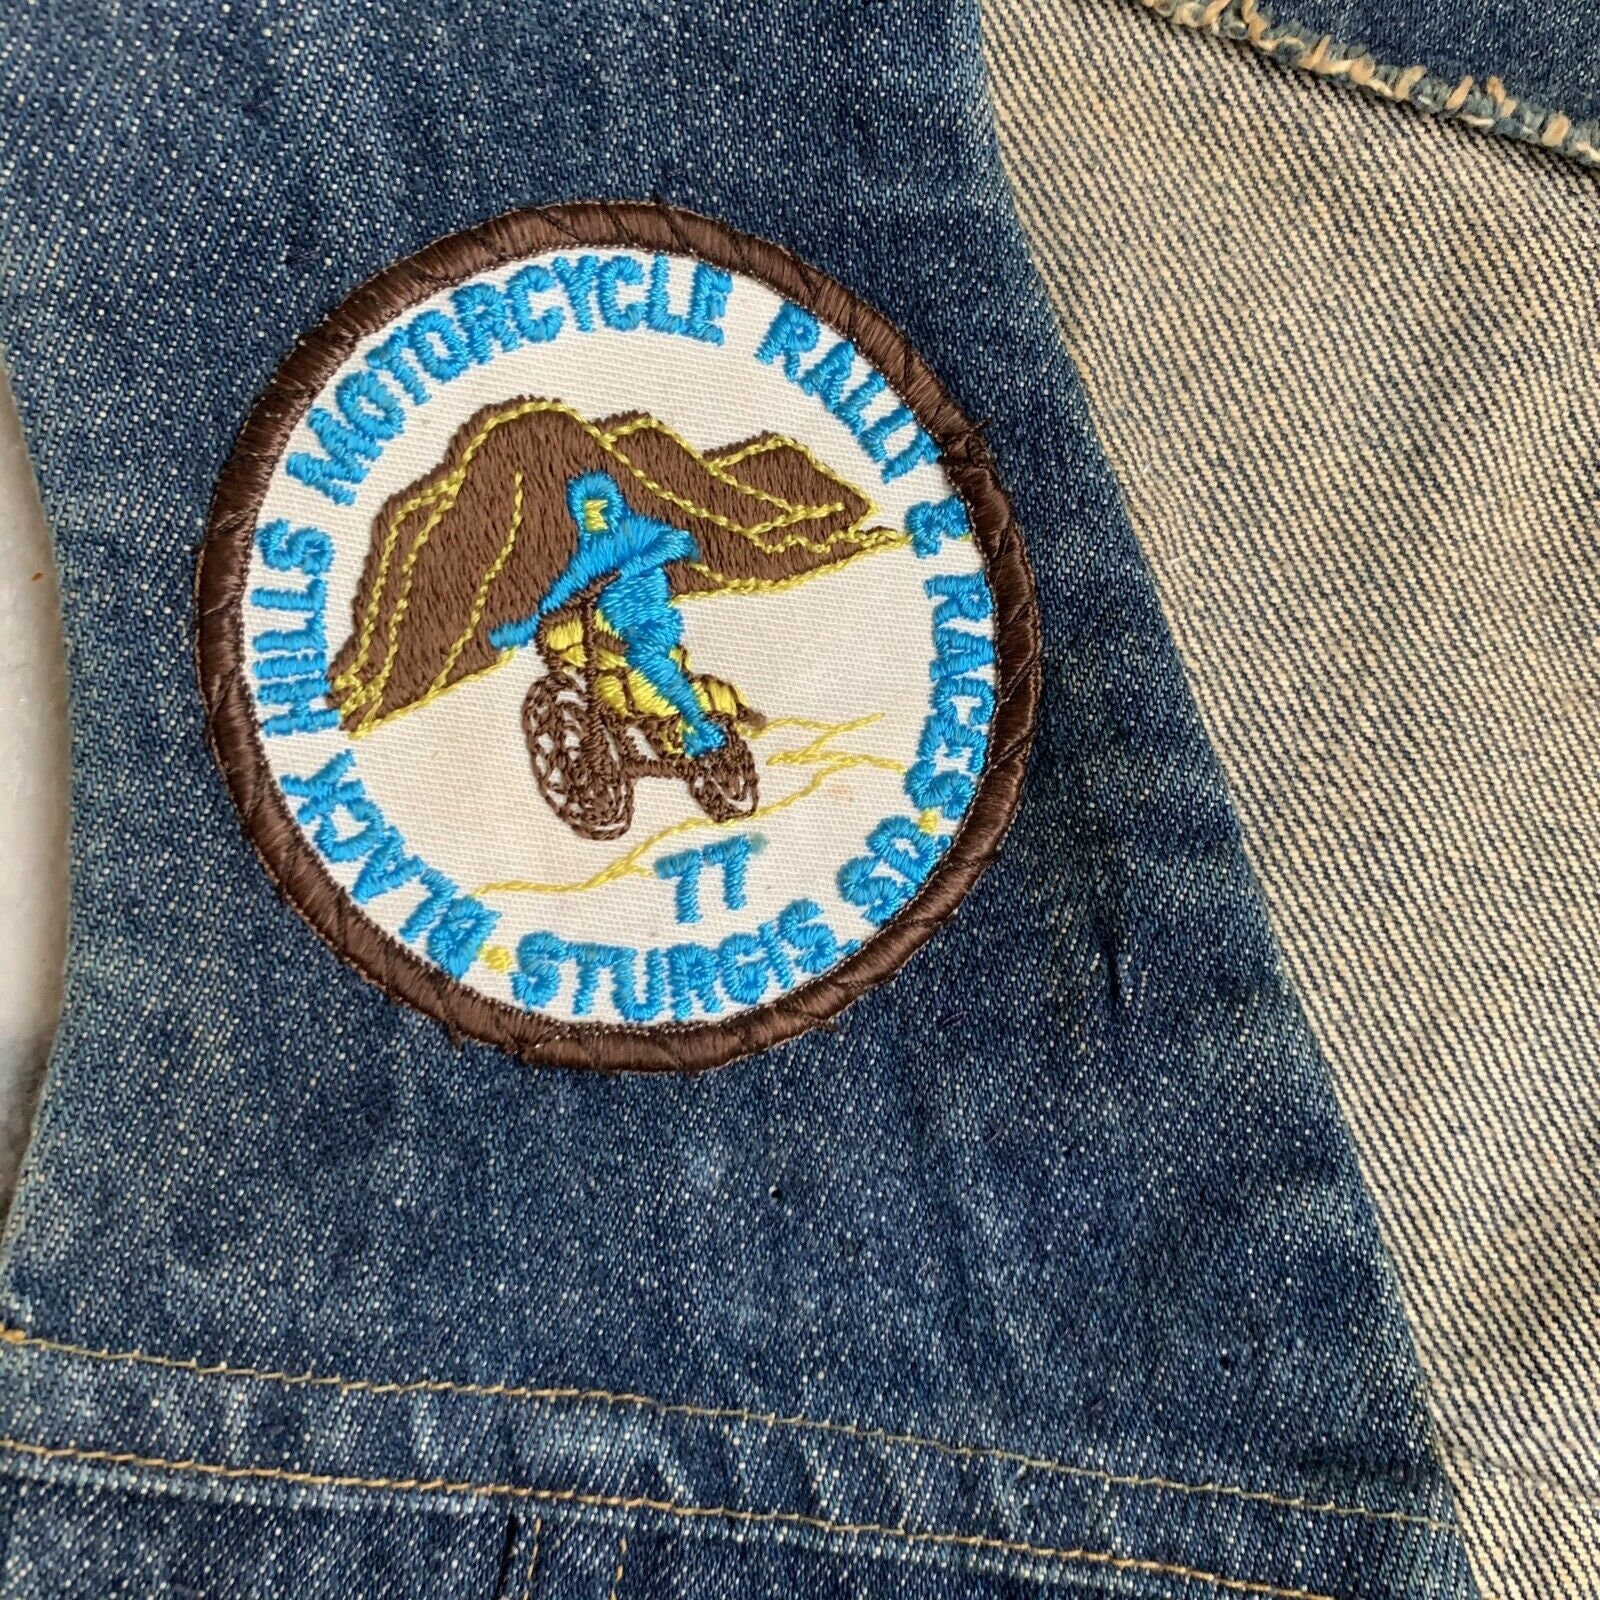 Sturgis Rally Patch Collection Denim Motorcycle Jean Jacket | Etsy